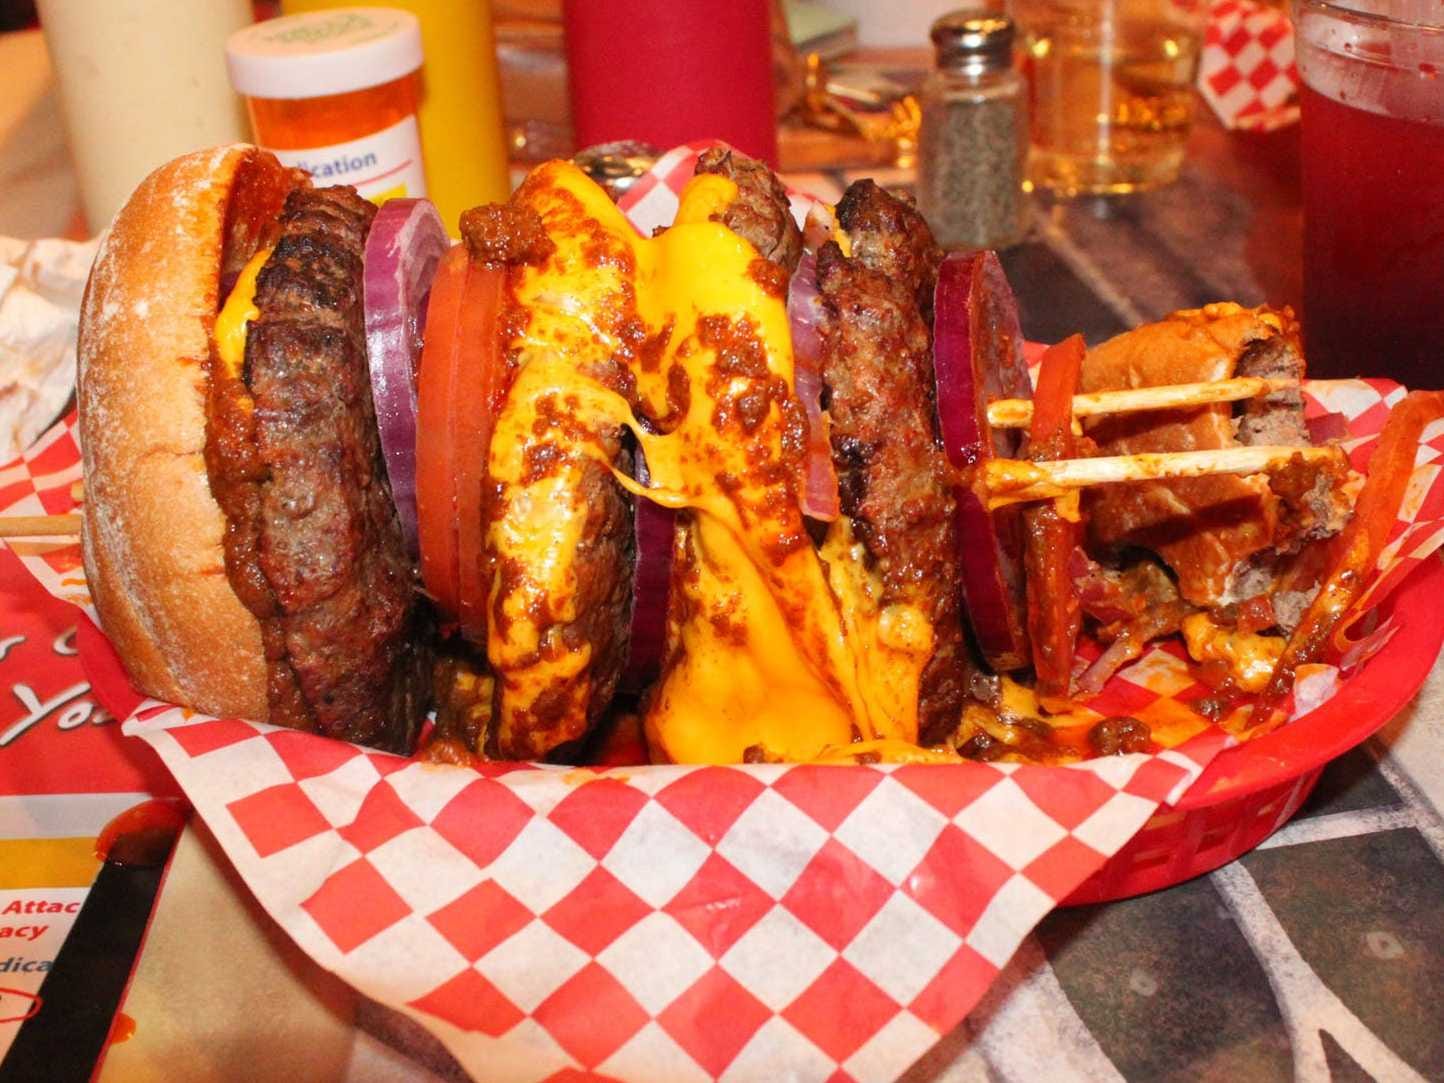 <p>Las Vegas' <a href="https://www.heartattackgrill.com/">Heart Attack Grill</a> is periodically in the news for its calorific burgers. Some variations contain five burger patties with bacon and, of course, a side of fries.</p>